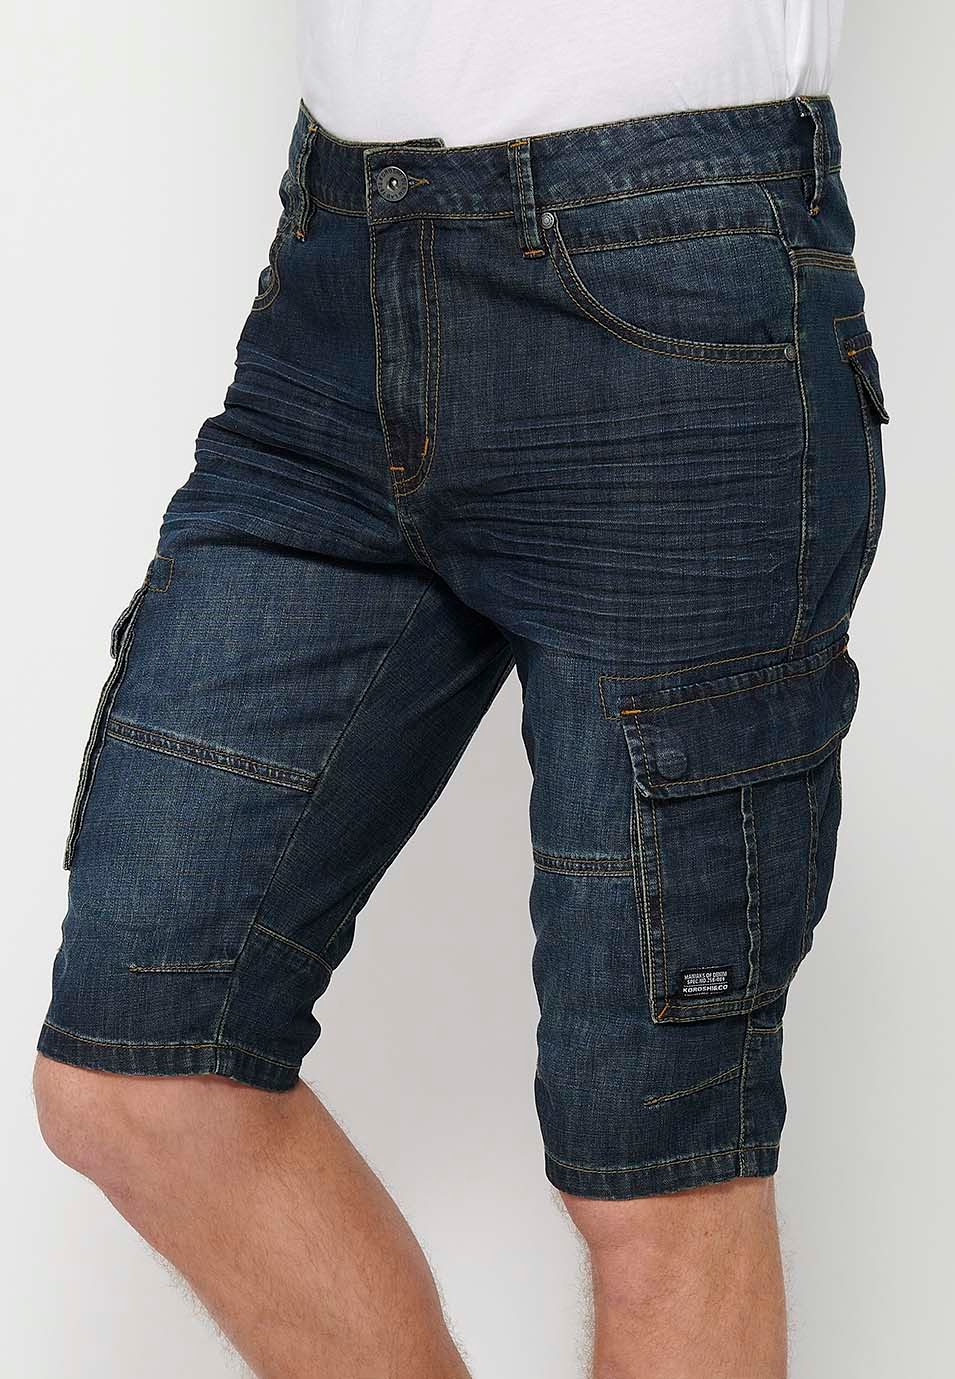 Cotton Pirate Denim Bermuda Shorts with Side Pockets and Front Closure with Zipper and Button in Blue for Men 2